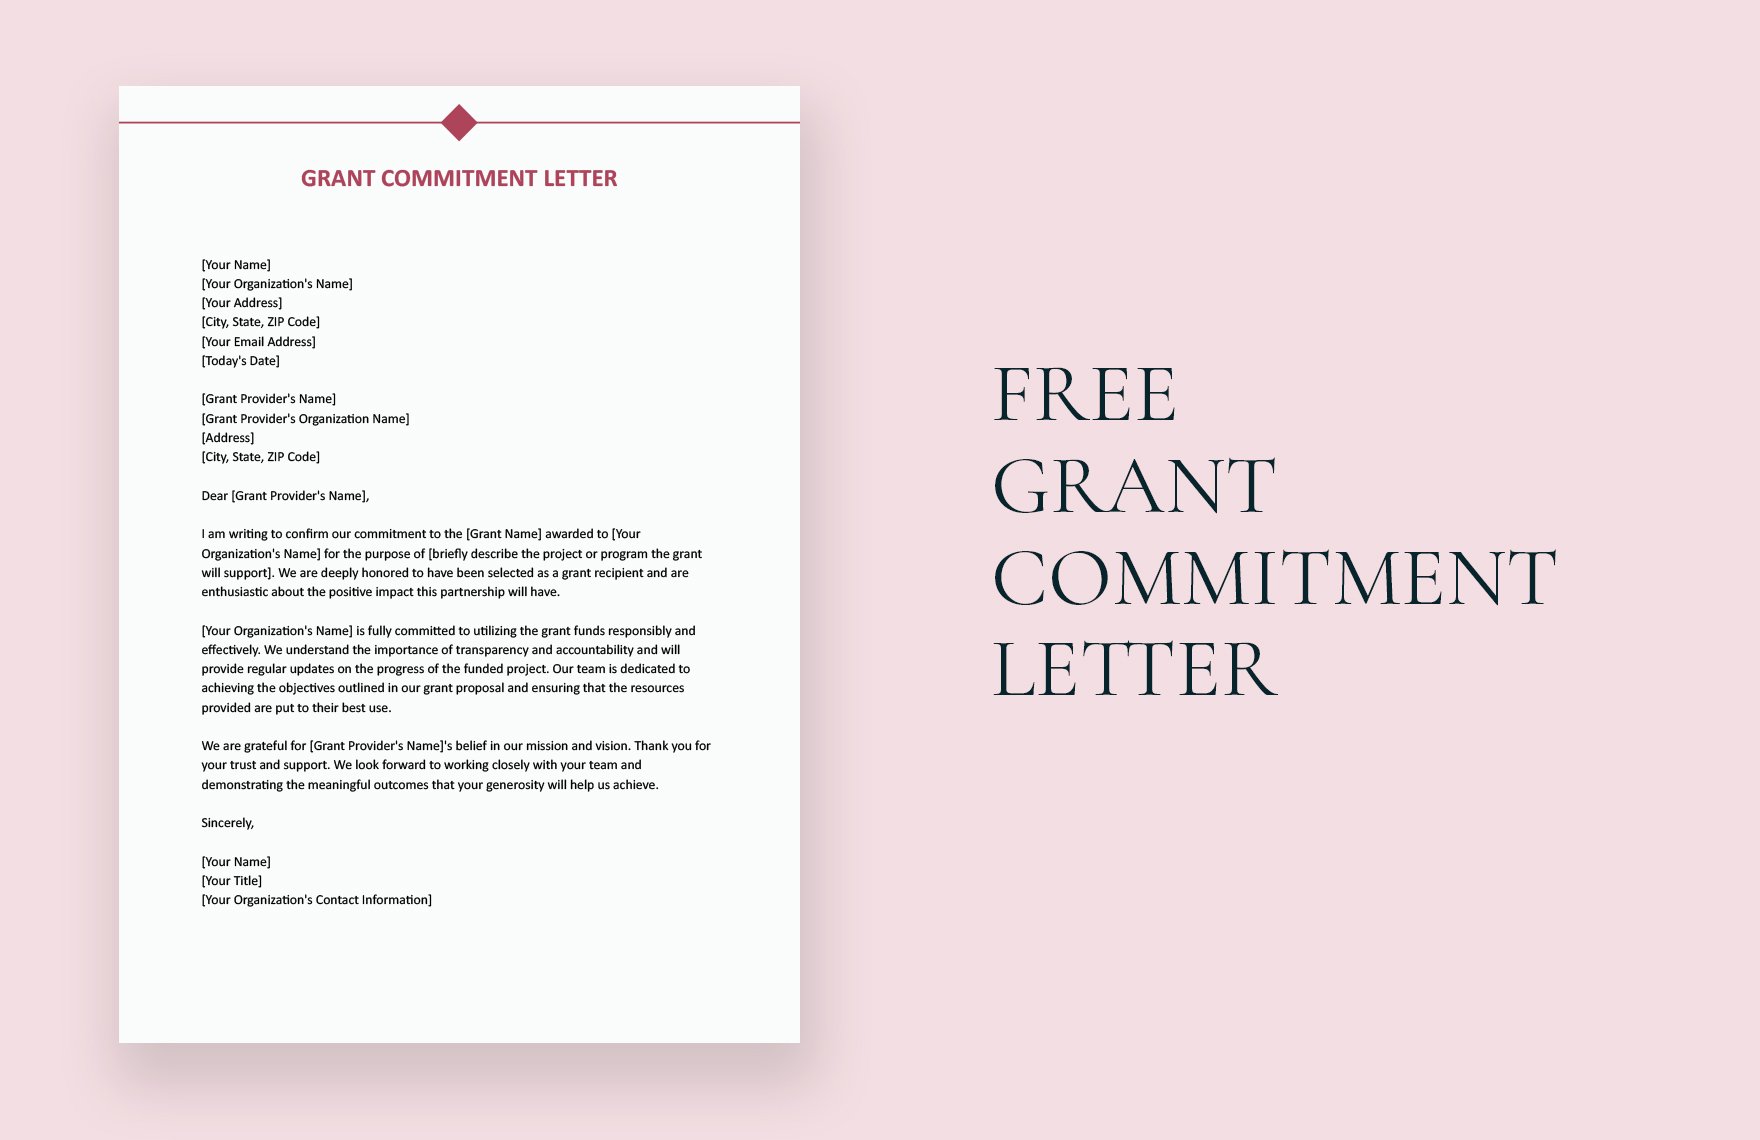 Grant Commitment Letter in Word, Google Docs